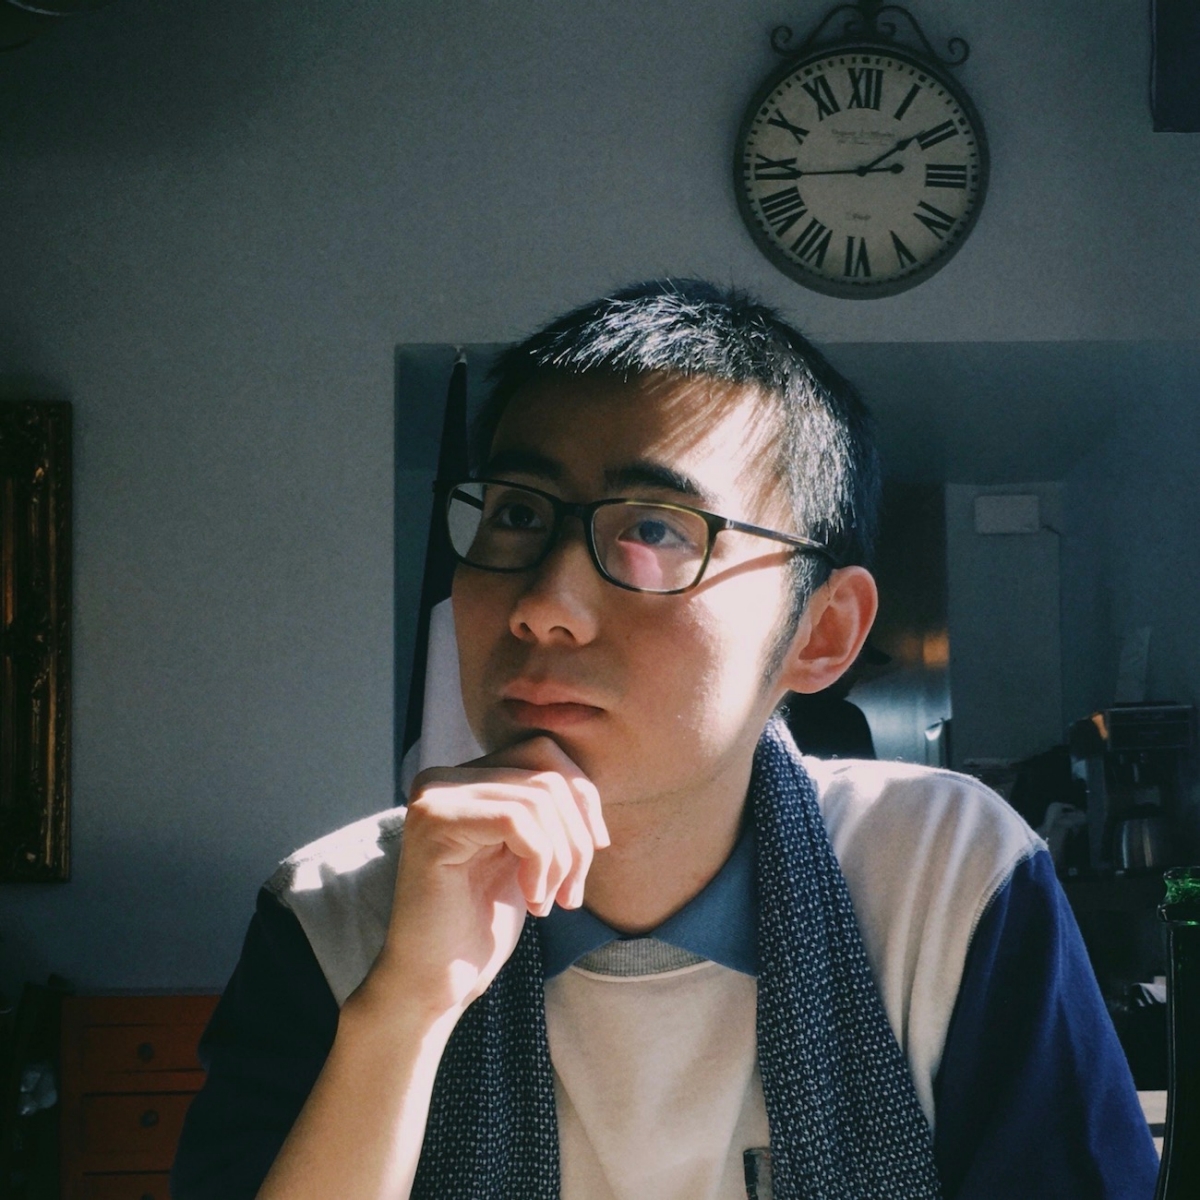 Zhen Yu (Victor) Yao wears glasses and a multicolor shirt, looking away from the camera.